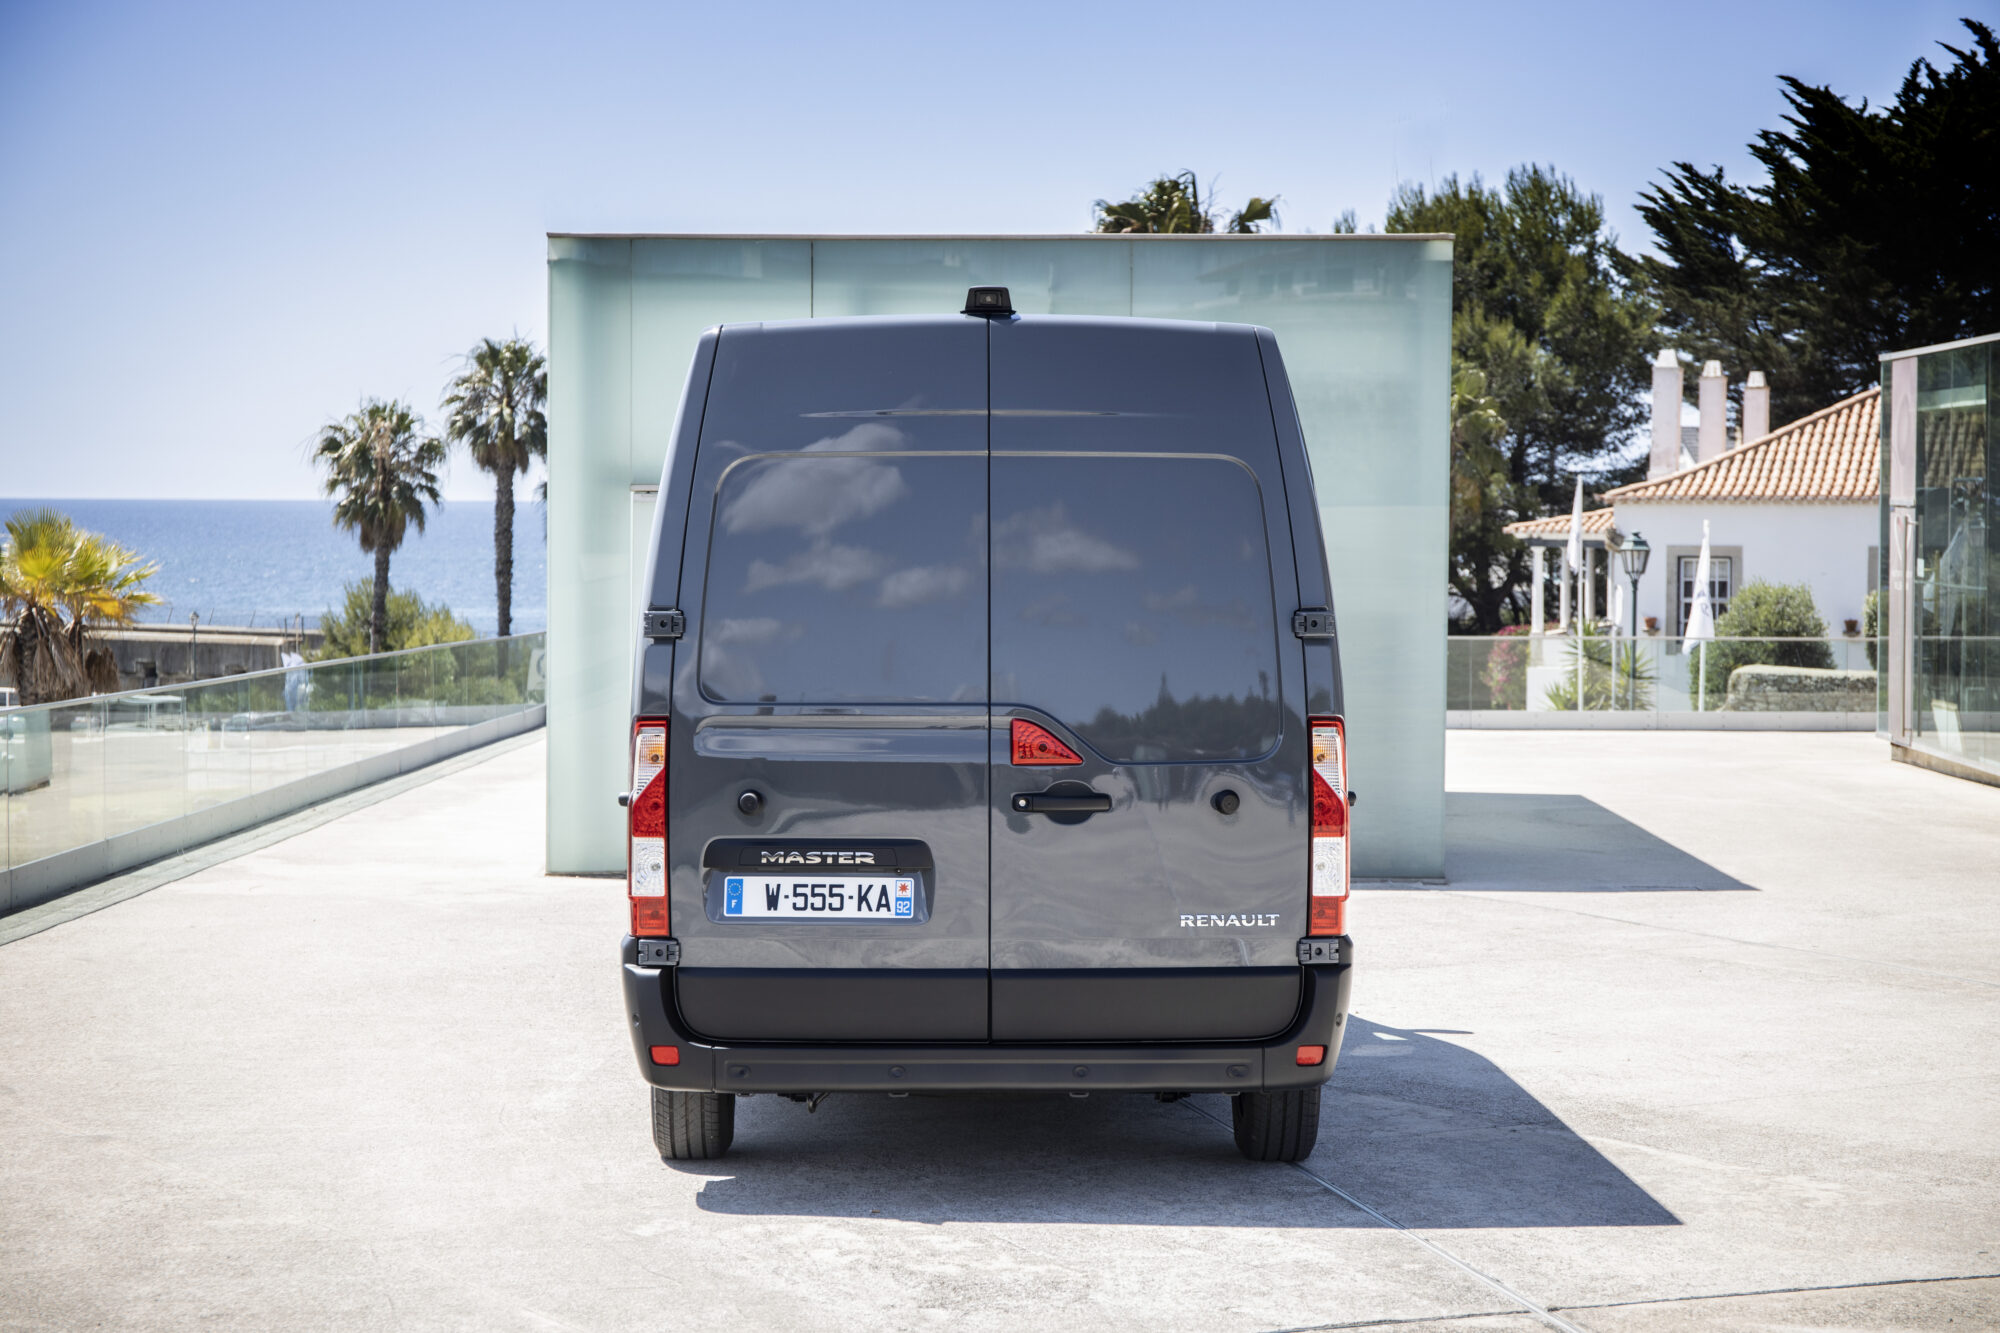 2019 - New Renault MASTER press tests in Portugal